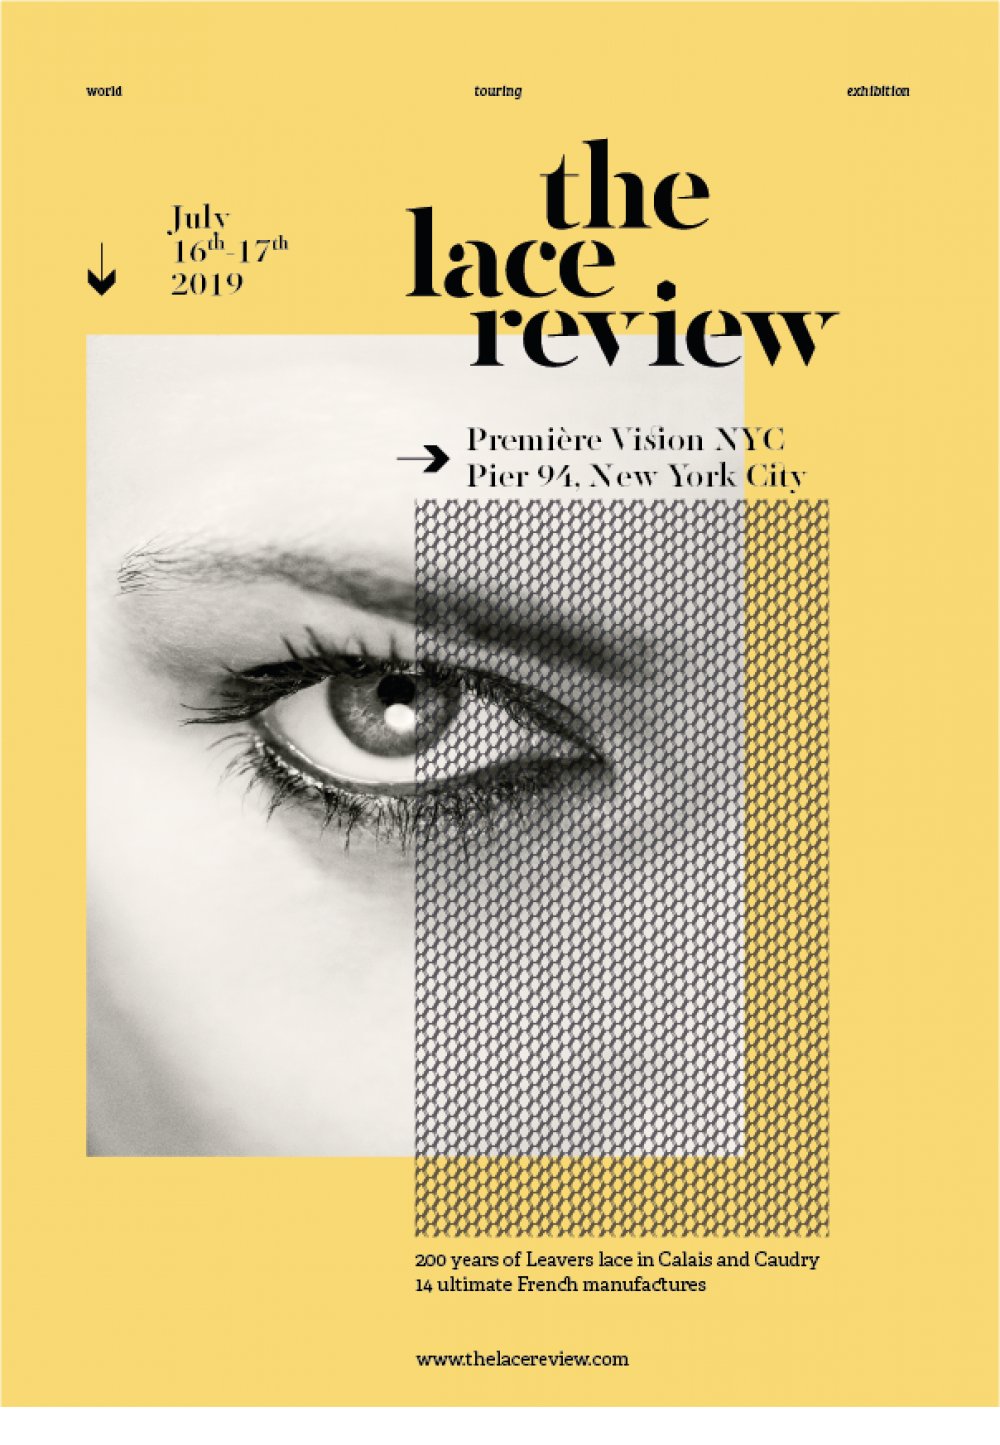 The Lace Review <br /> @New York